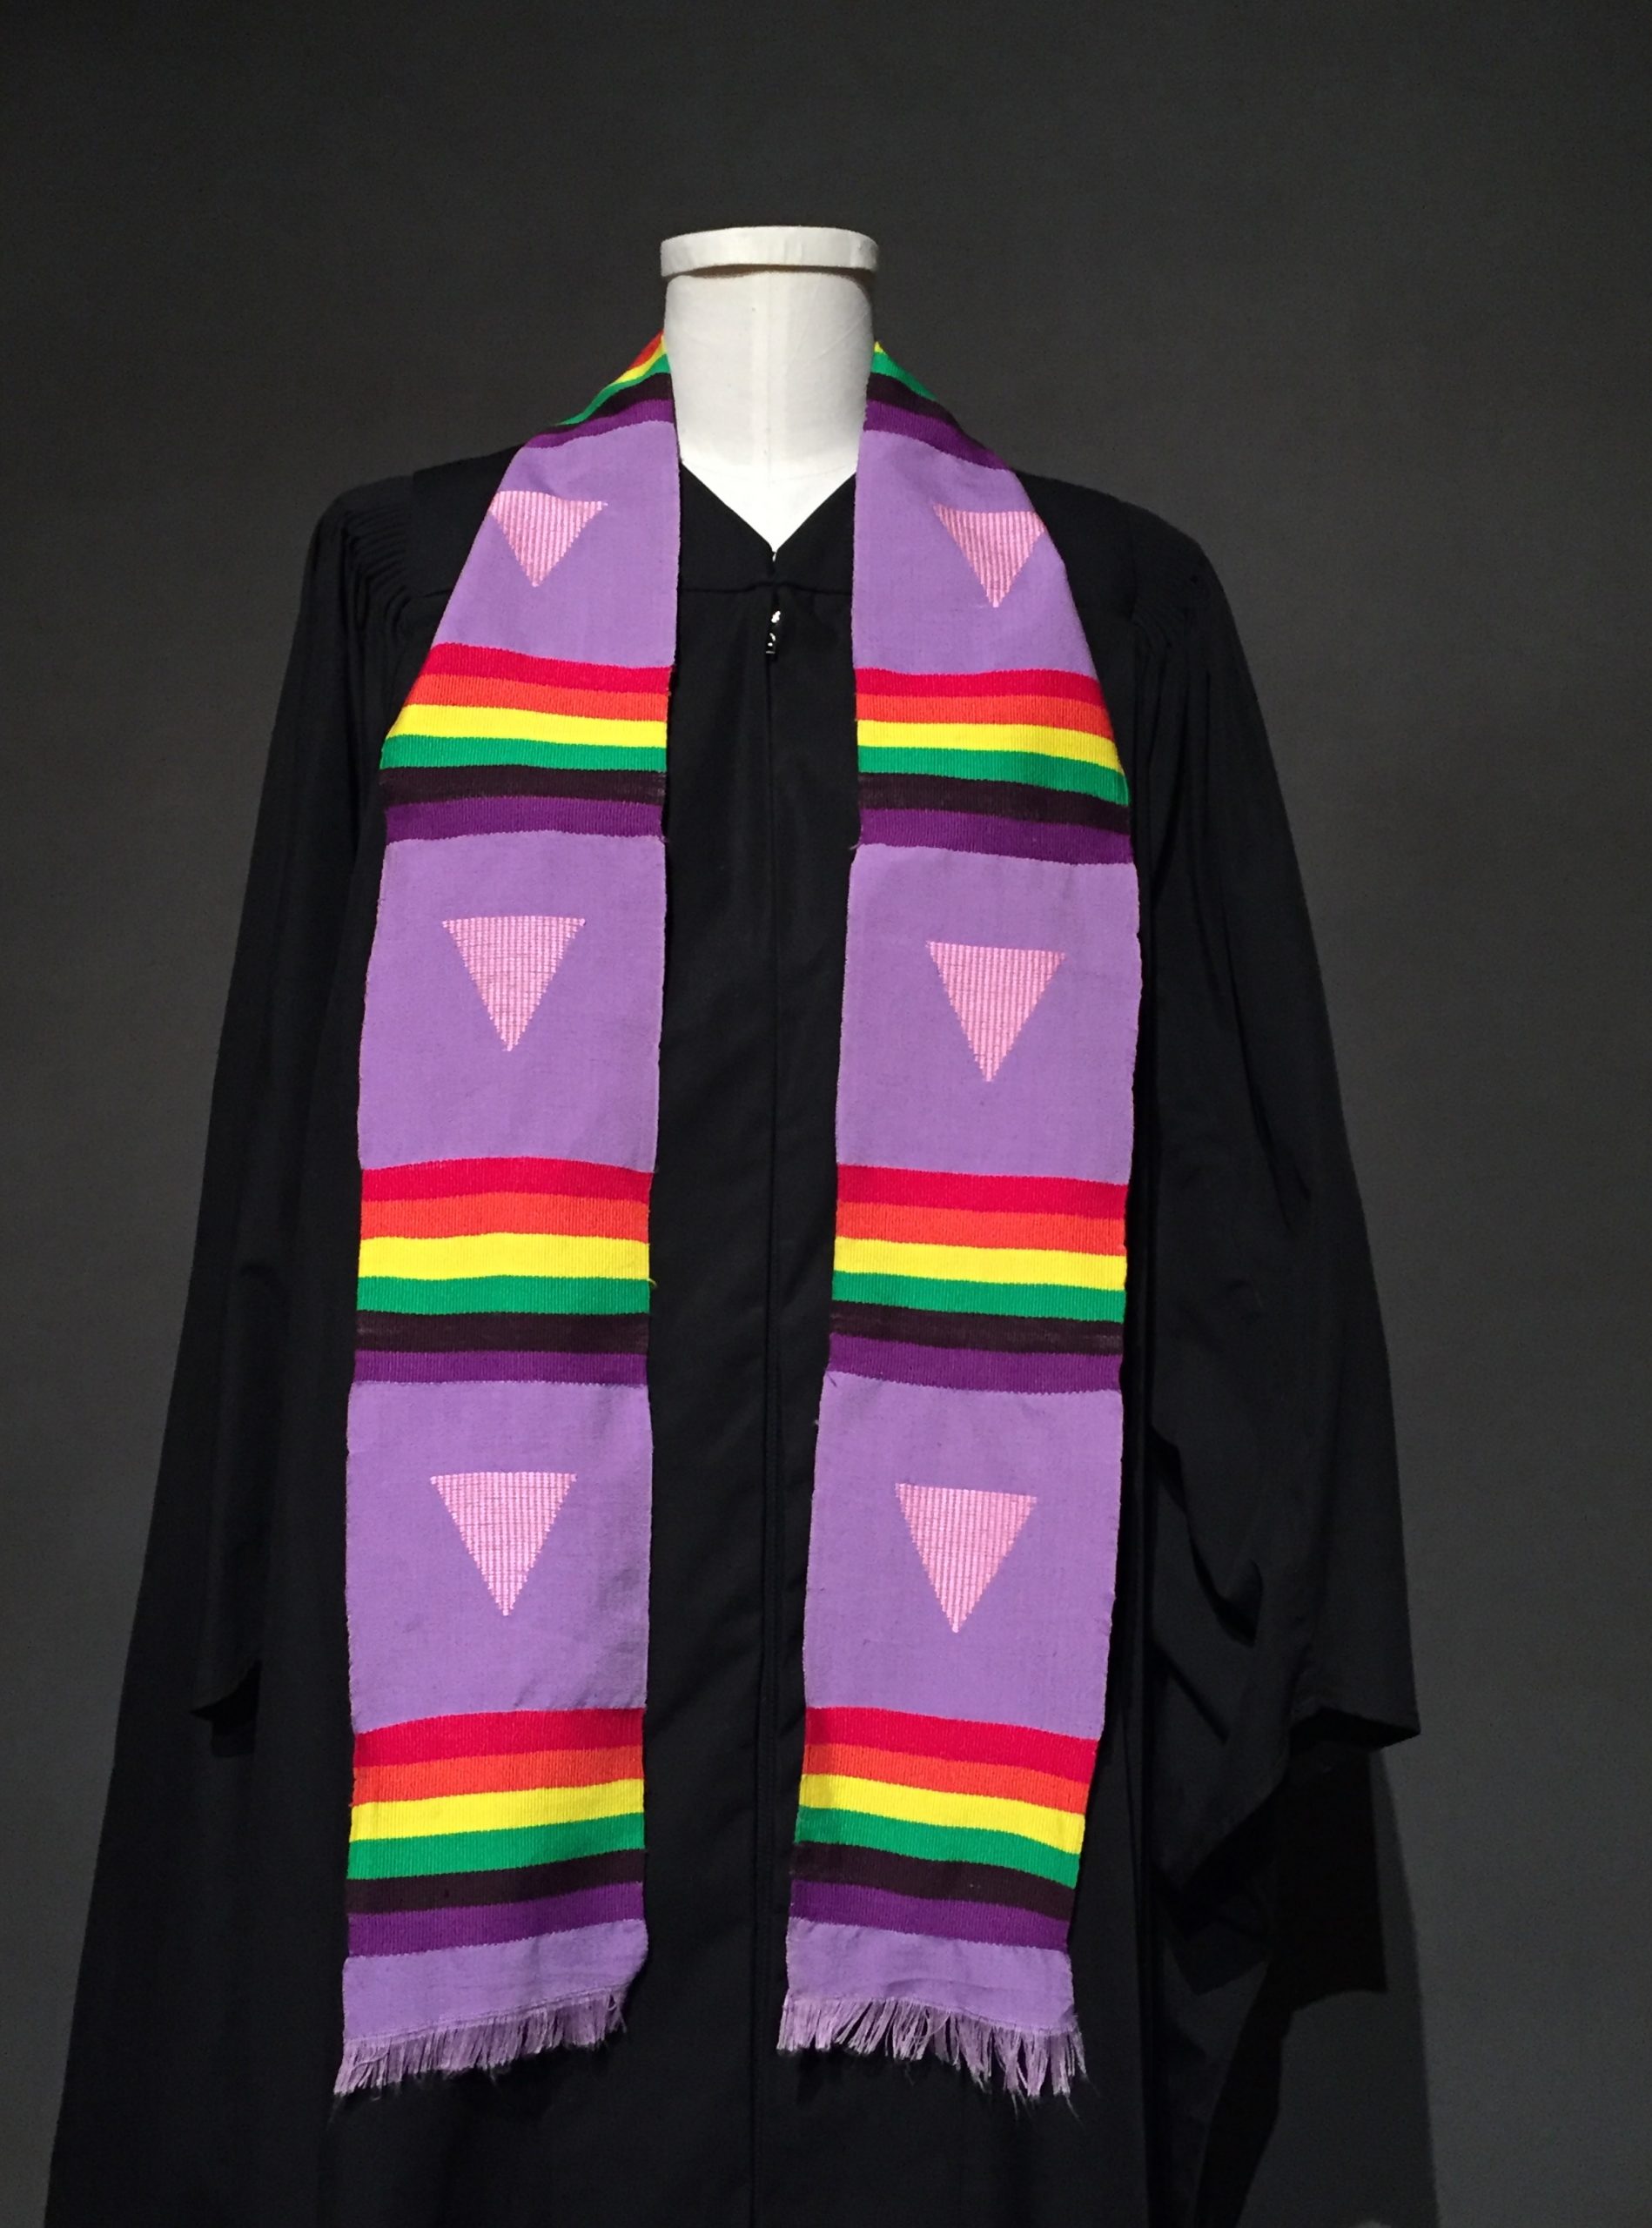 Black graduation robe, lavender graduation stole with triangle motif and rainbow bands